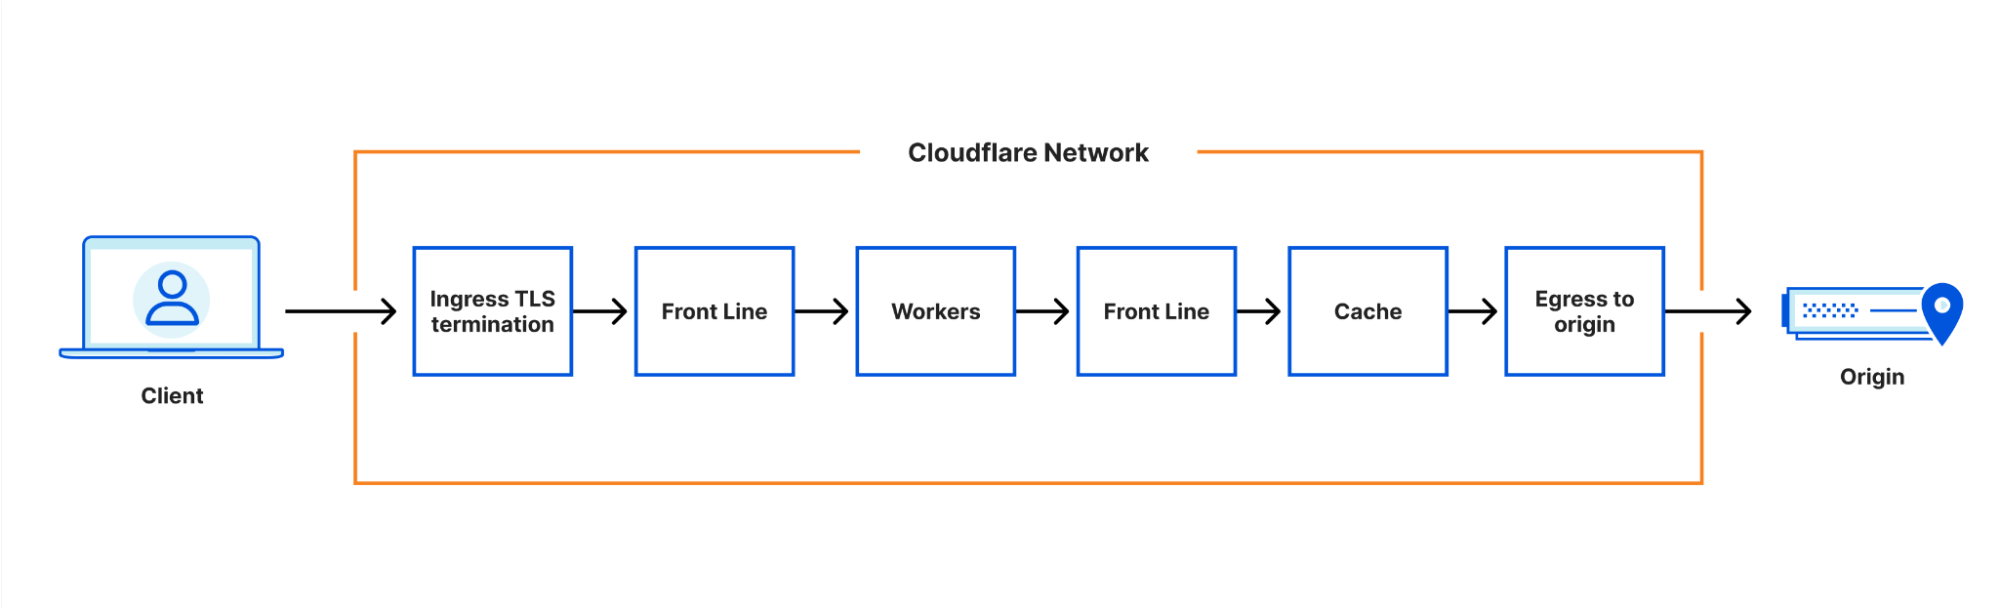 Building Cloudflare on Cloudflare